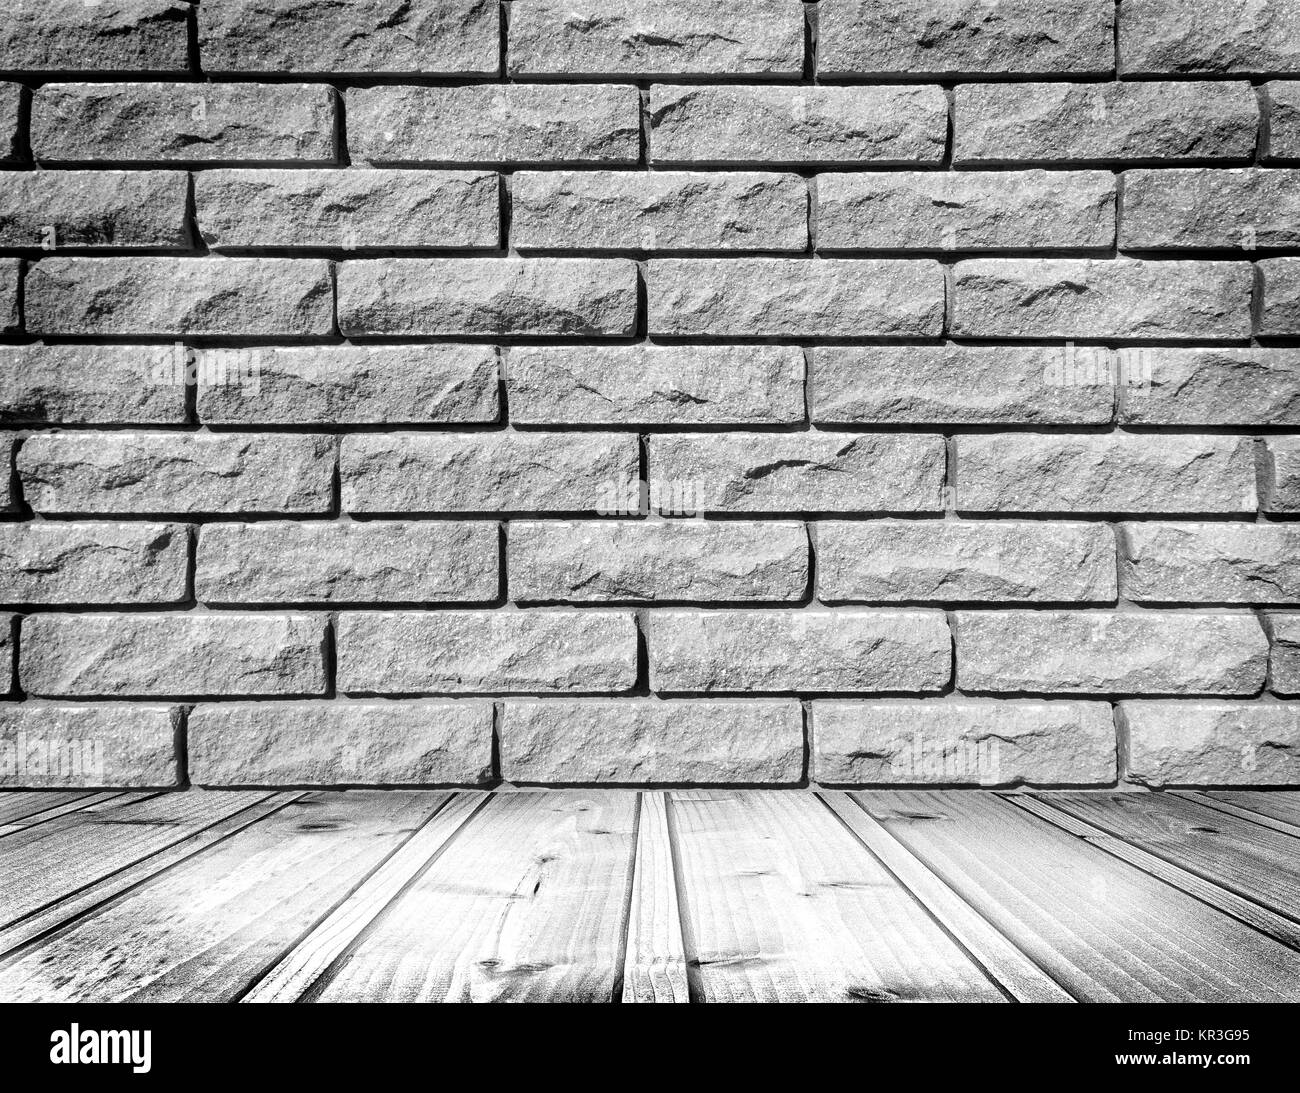 White Room Interior With Brick Wall And Wood Floor Stock Photo